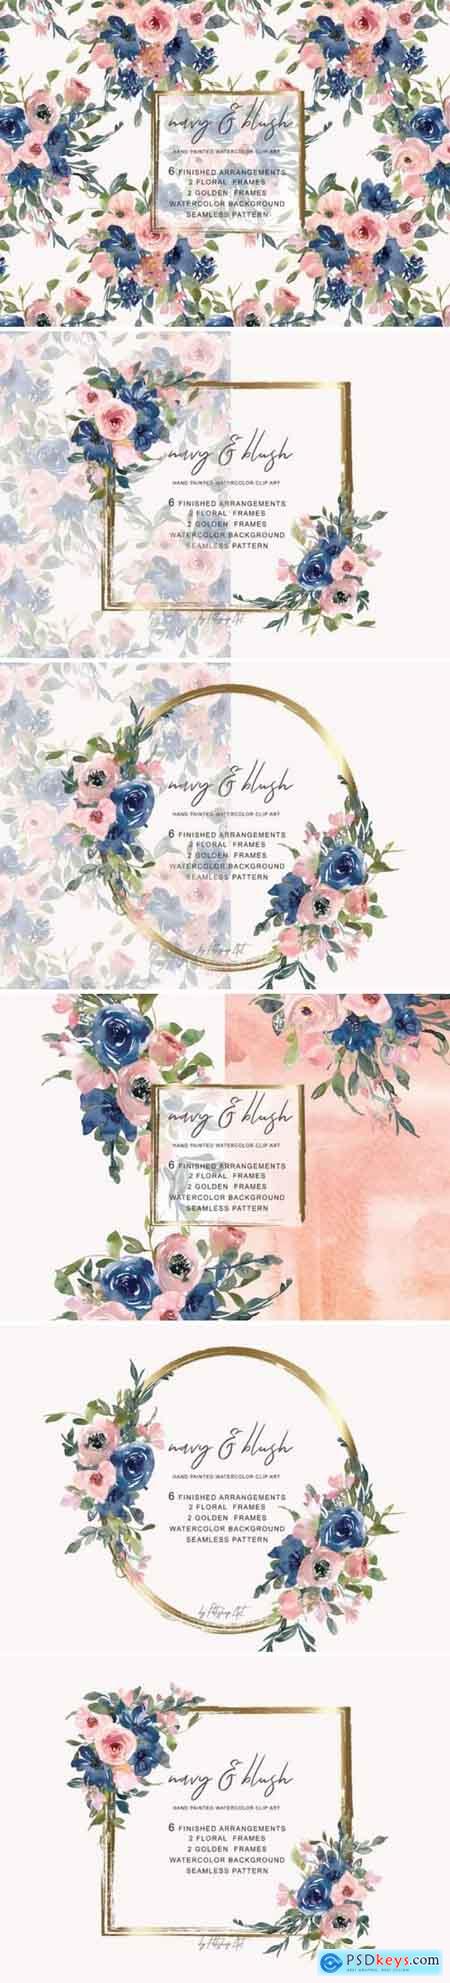 Navy and Blush Floral Bouquet Clipart